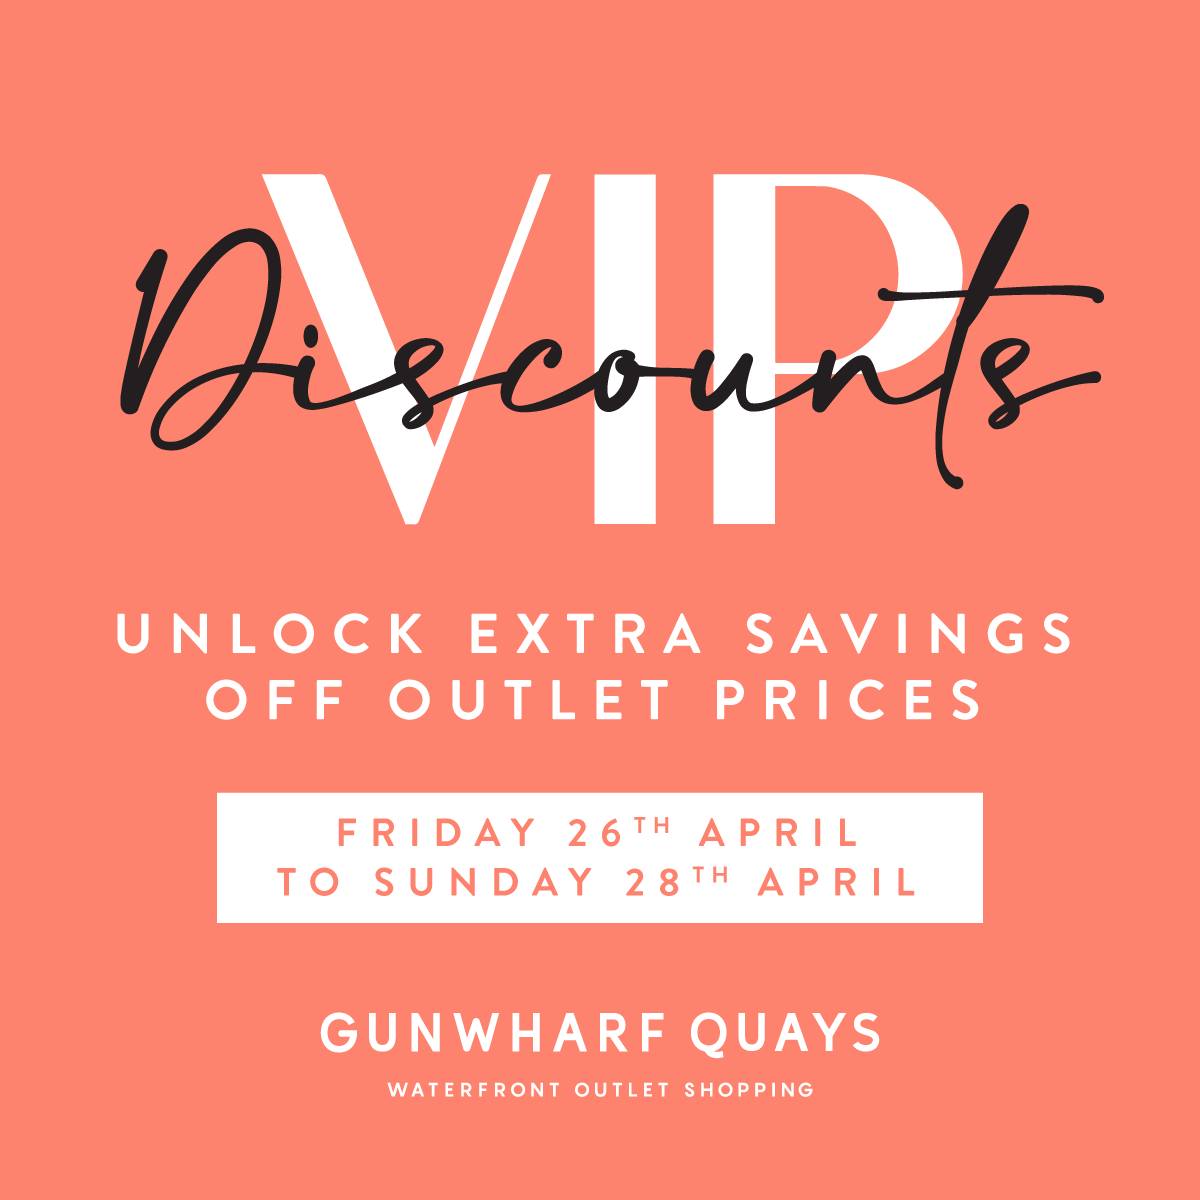 Fancy getting a discount 𝘰𝘯 𝘵𝘰𝘱 𝘰𝘧 outlet prices? That's exactly what's on offer @GunwharfQuays in two weeks' time with the return of the VIP Sale. Sign up now to get your pass to unlock big discounts from 26-28 April: gunwharf-quays.com/VIP-spring-2024